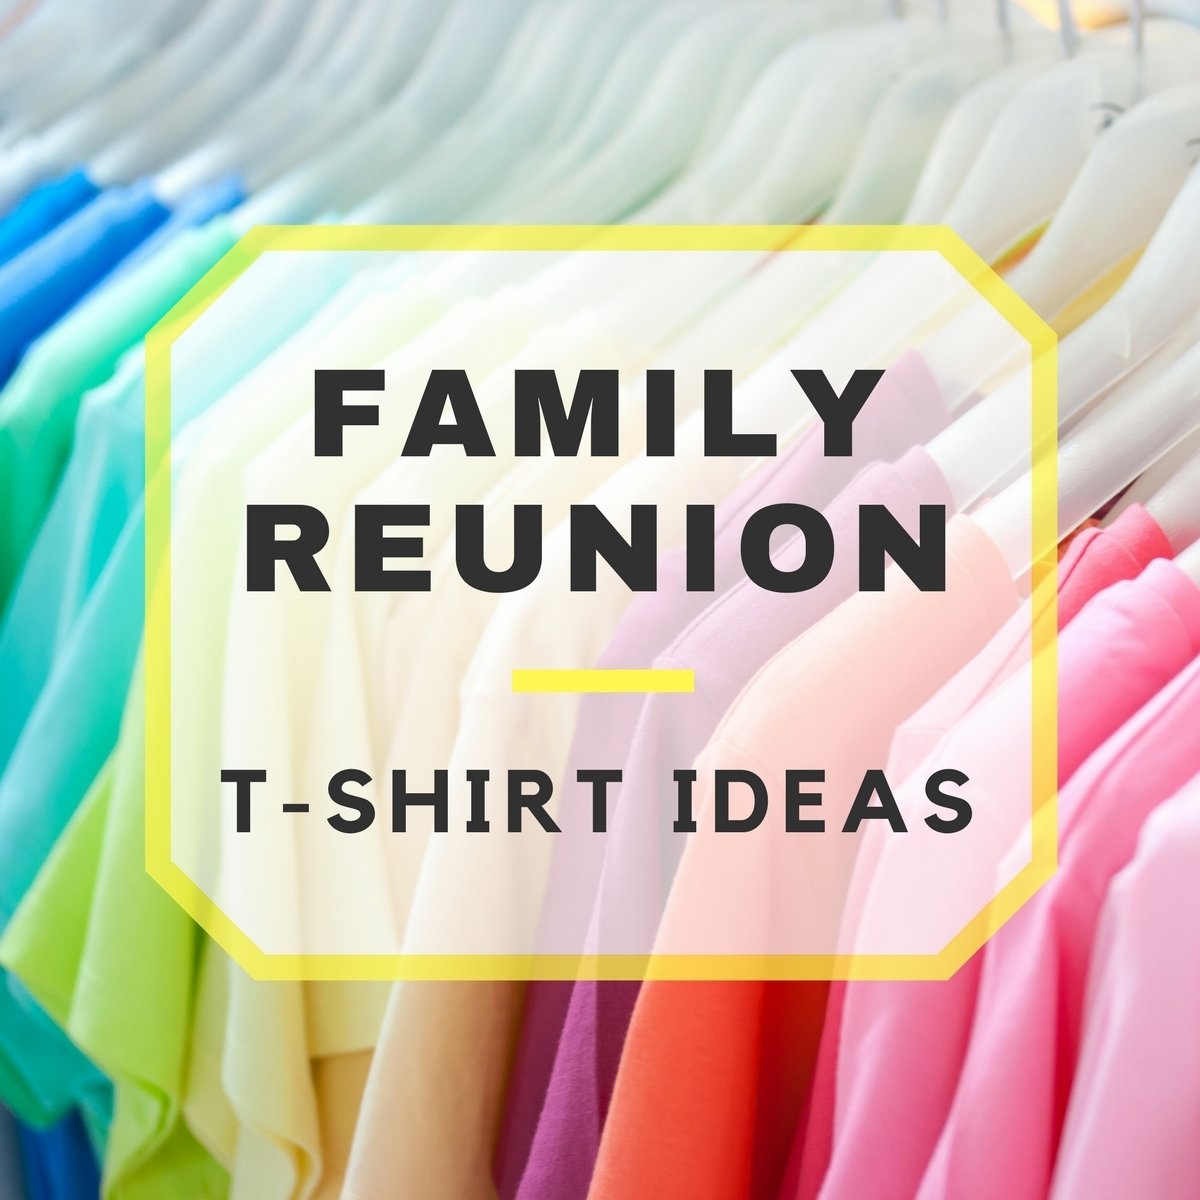 10 Most Recommended Ideas For A Family Reunion family reunion t shirts apparel 1 2022